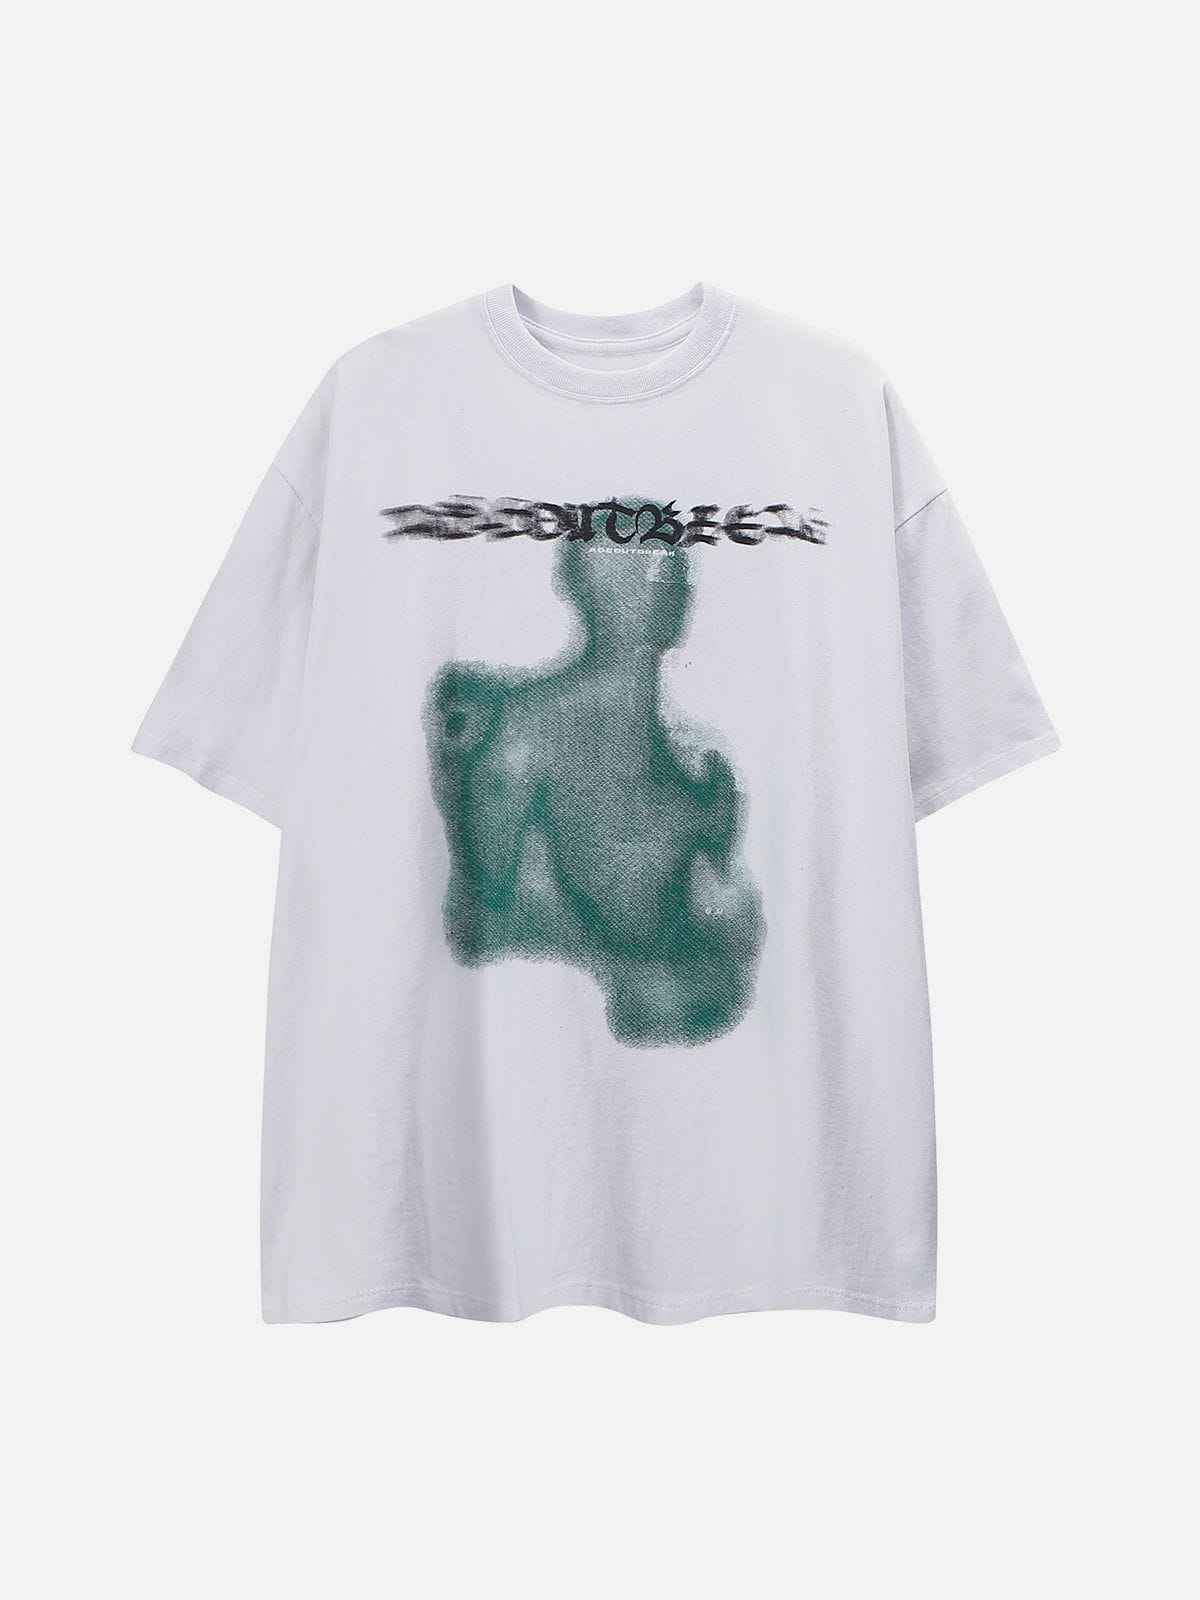 WLS Abstract Portrait Print Tee